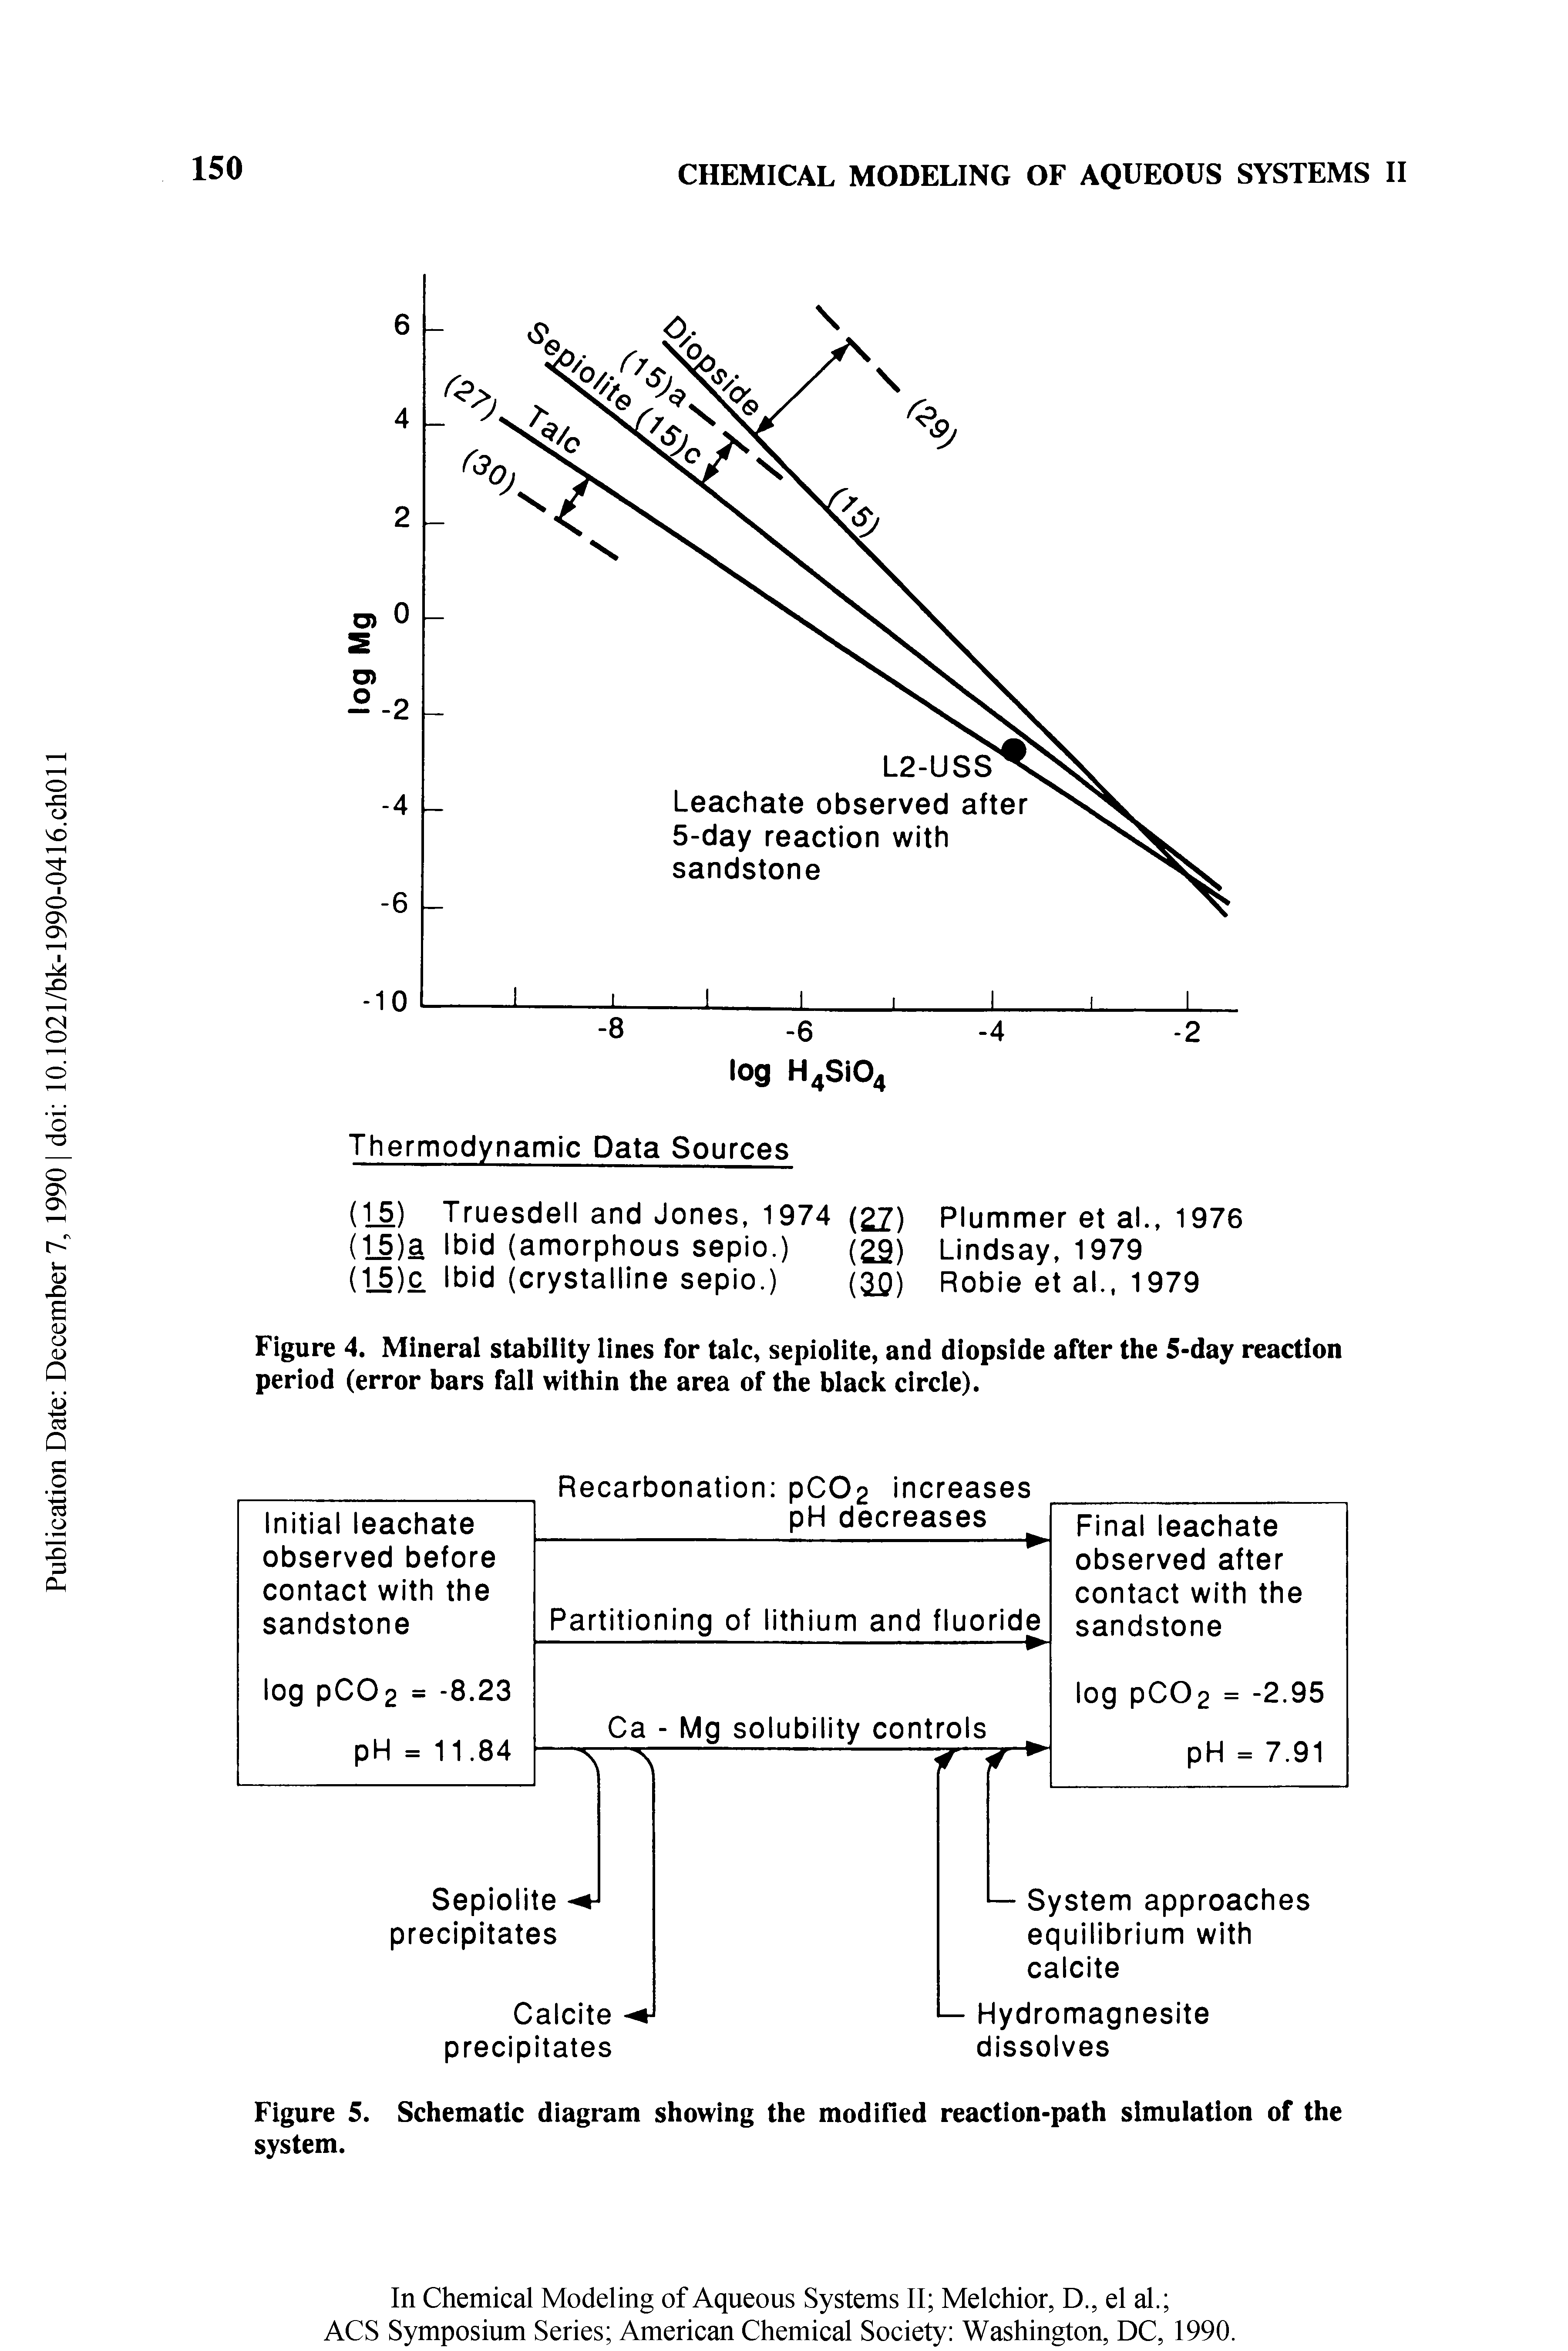 Figure 5. Schematic diagram showing the modified reaction-path simulation of the system.